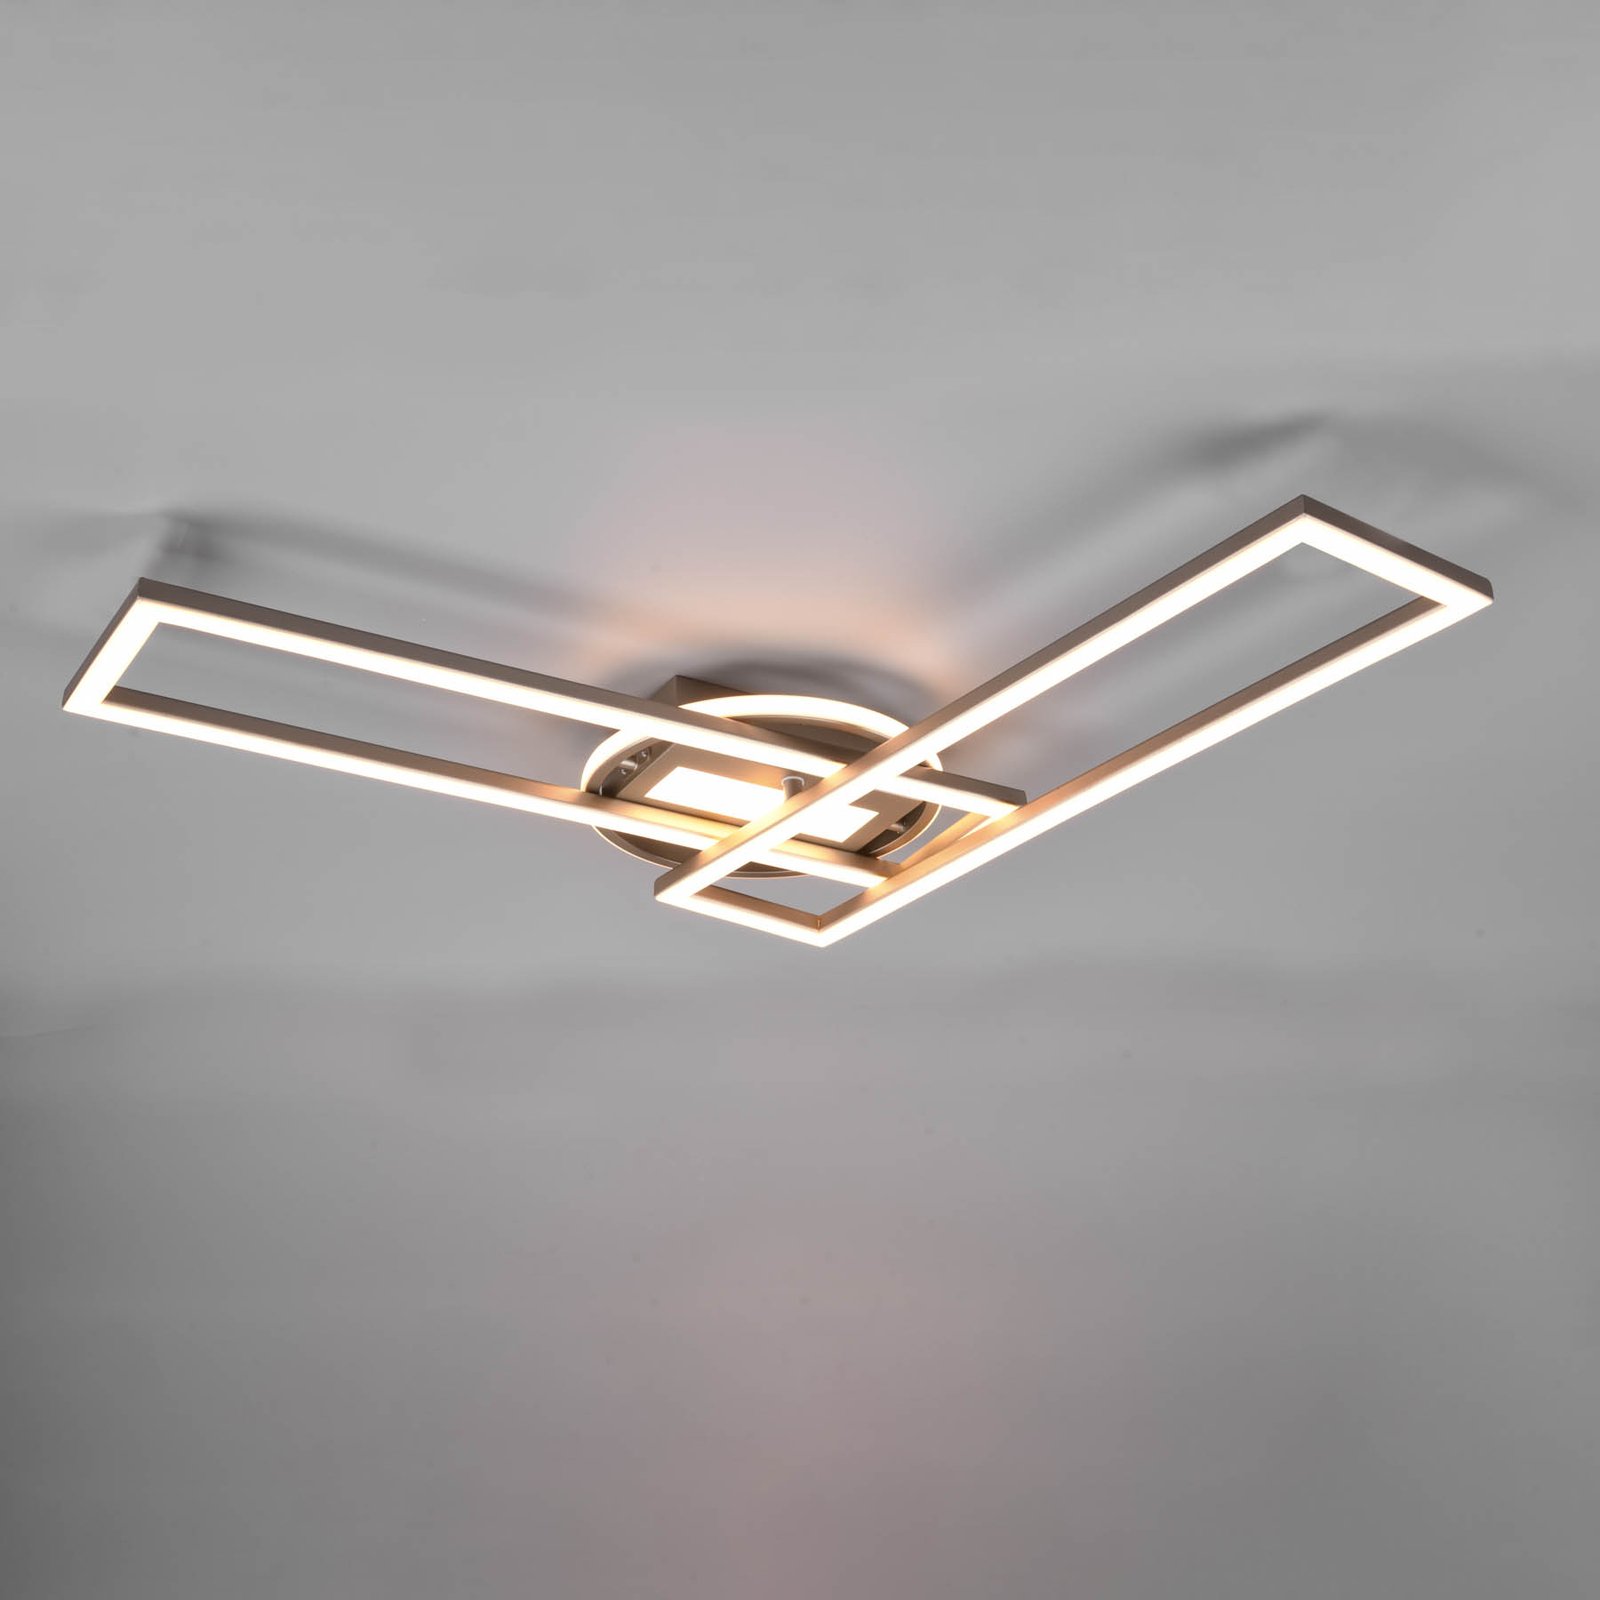 Twister LED ceiling light, rotatable remote nickel